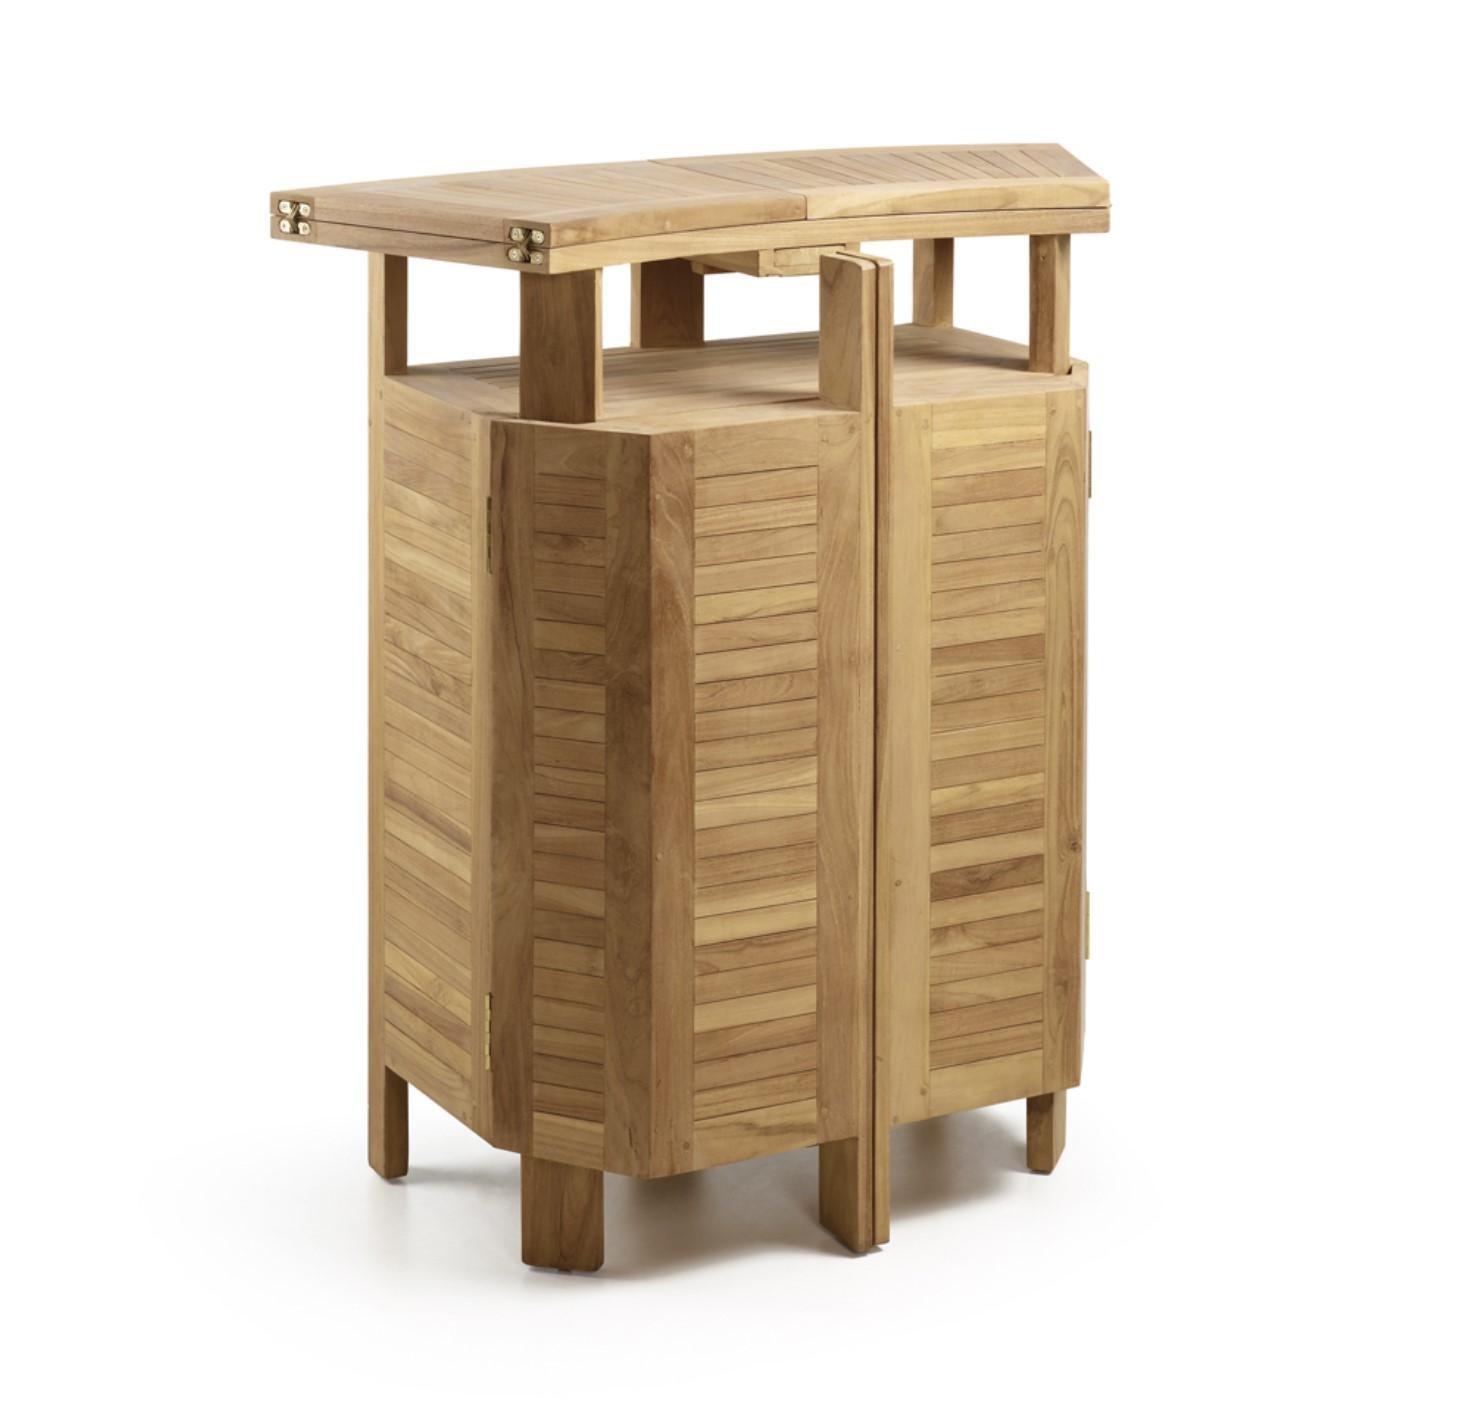 Modern New Teak Foldable Dry Bar, Indoor and Outdoor